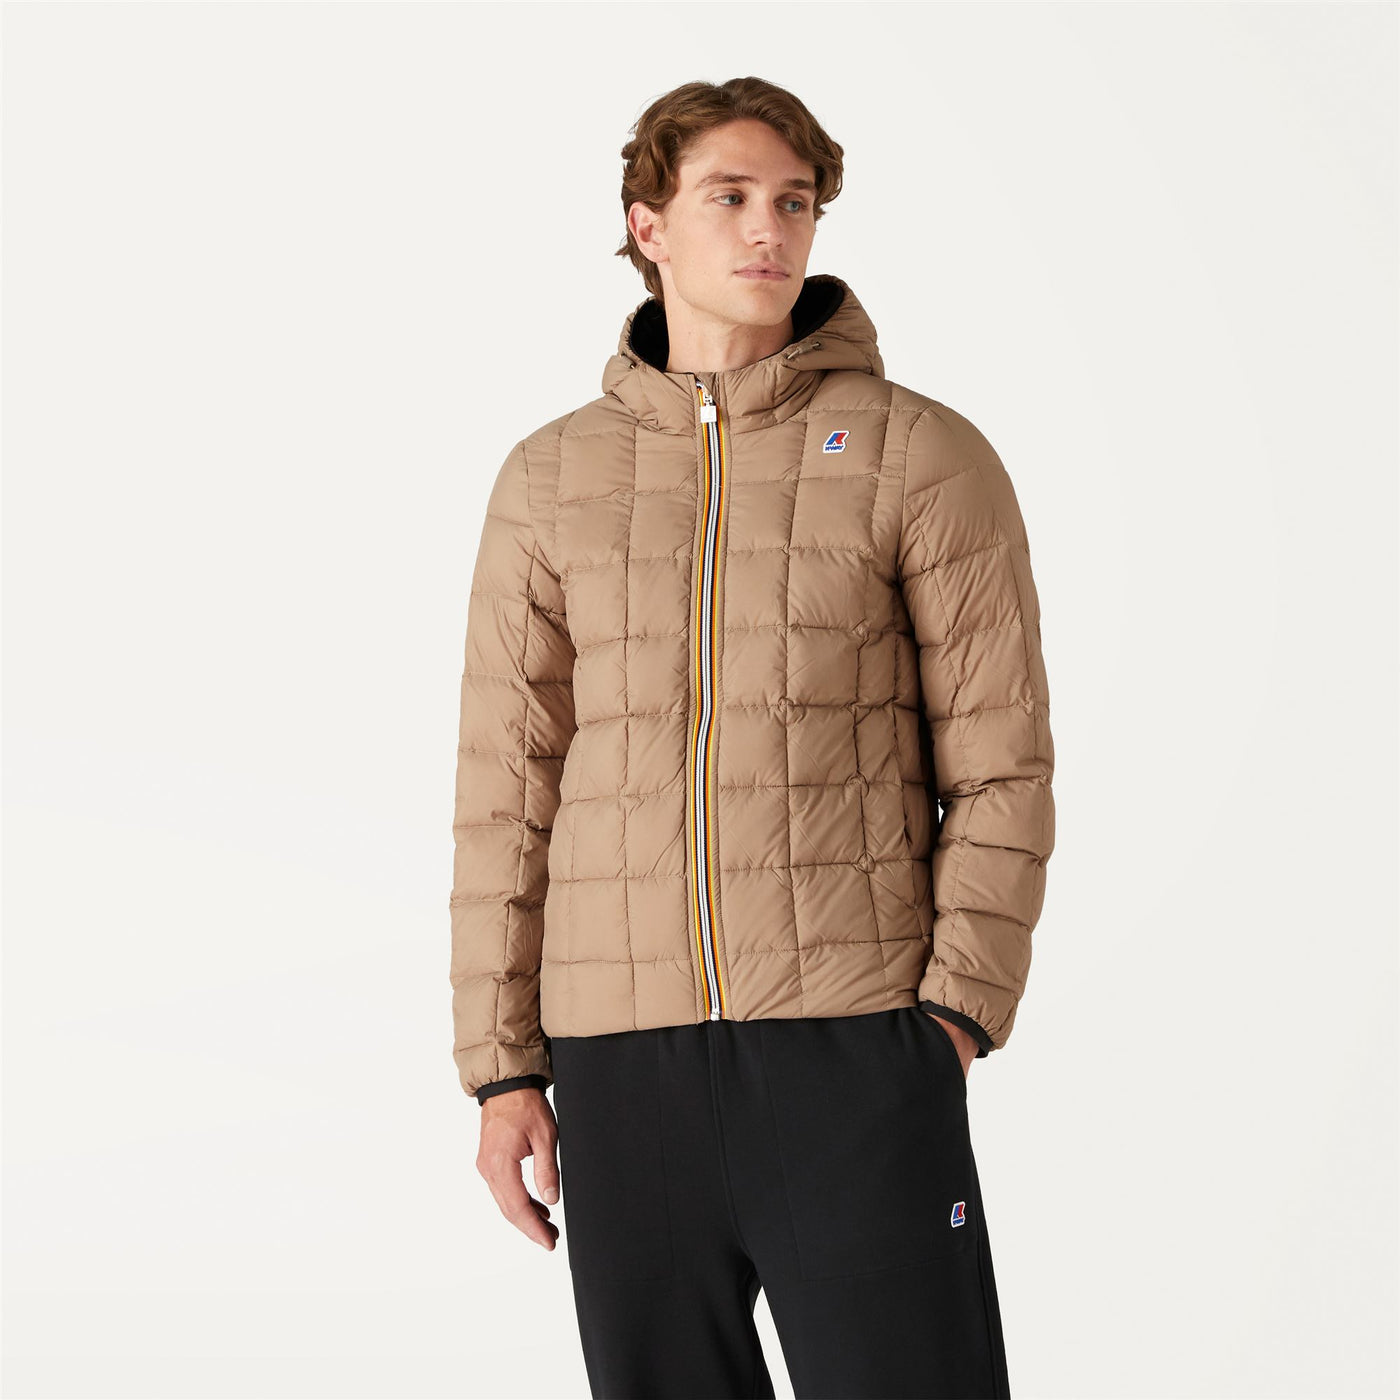 Jackets Man JACQUES THERMO PLUS.2 DOUBLE Short BLACK PURE - BEIGE TAUPE Detail Double				